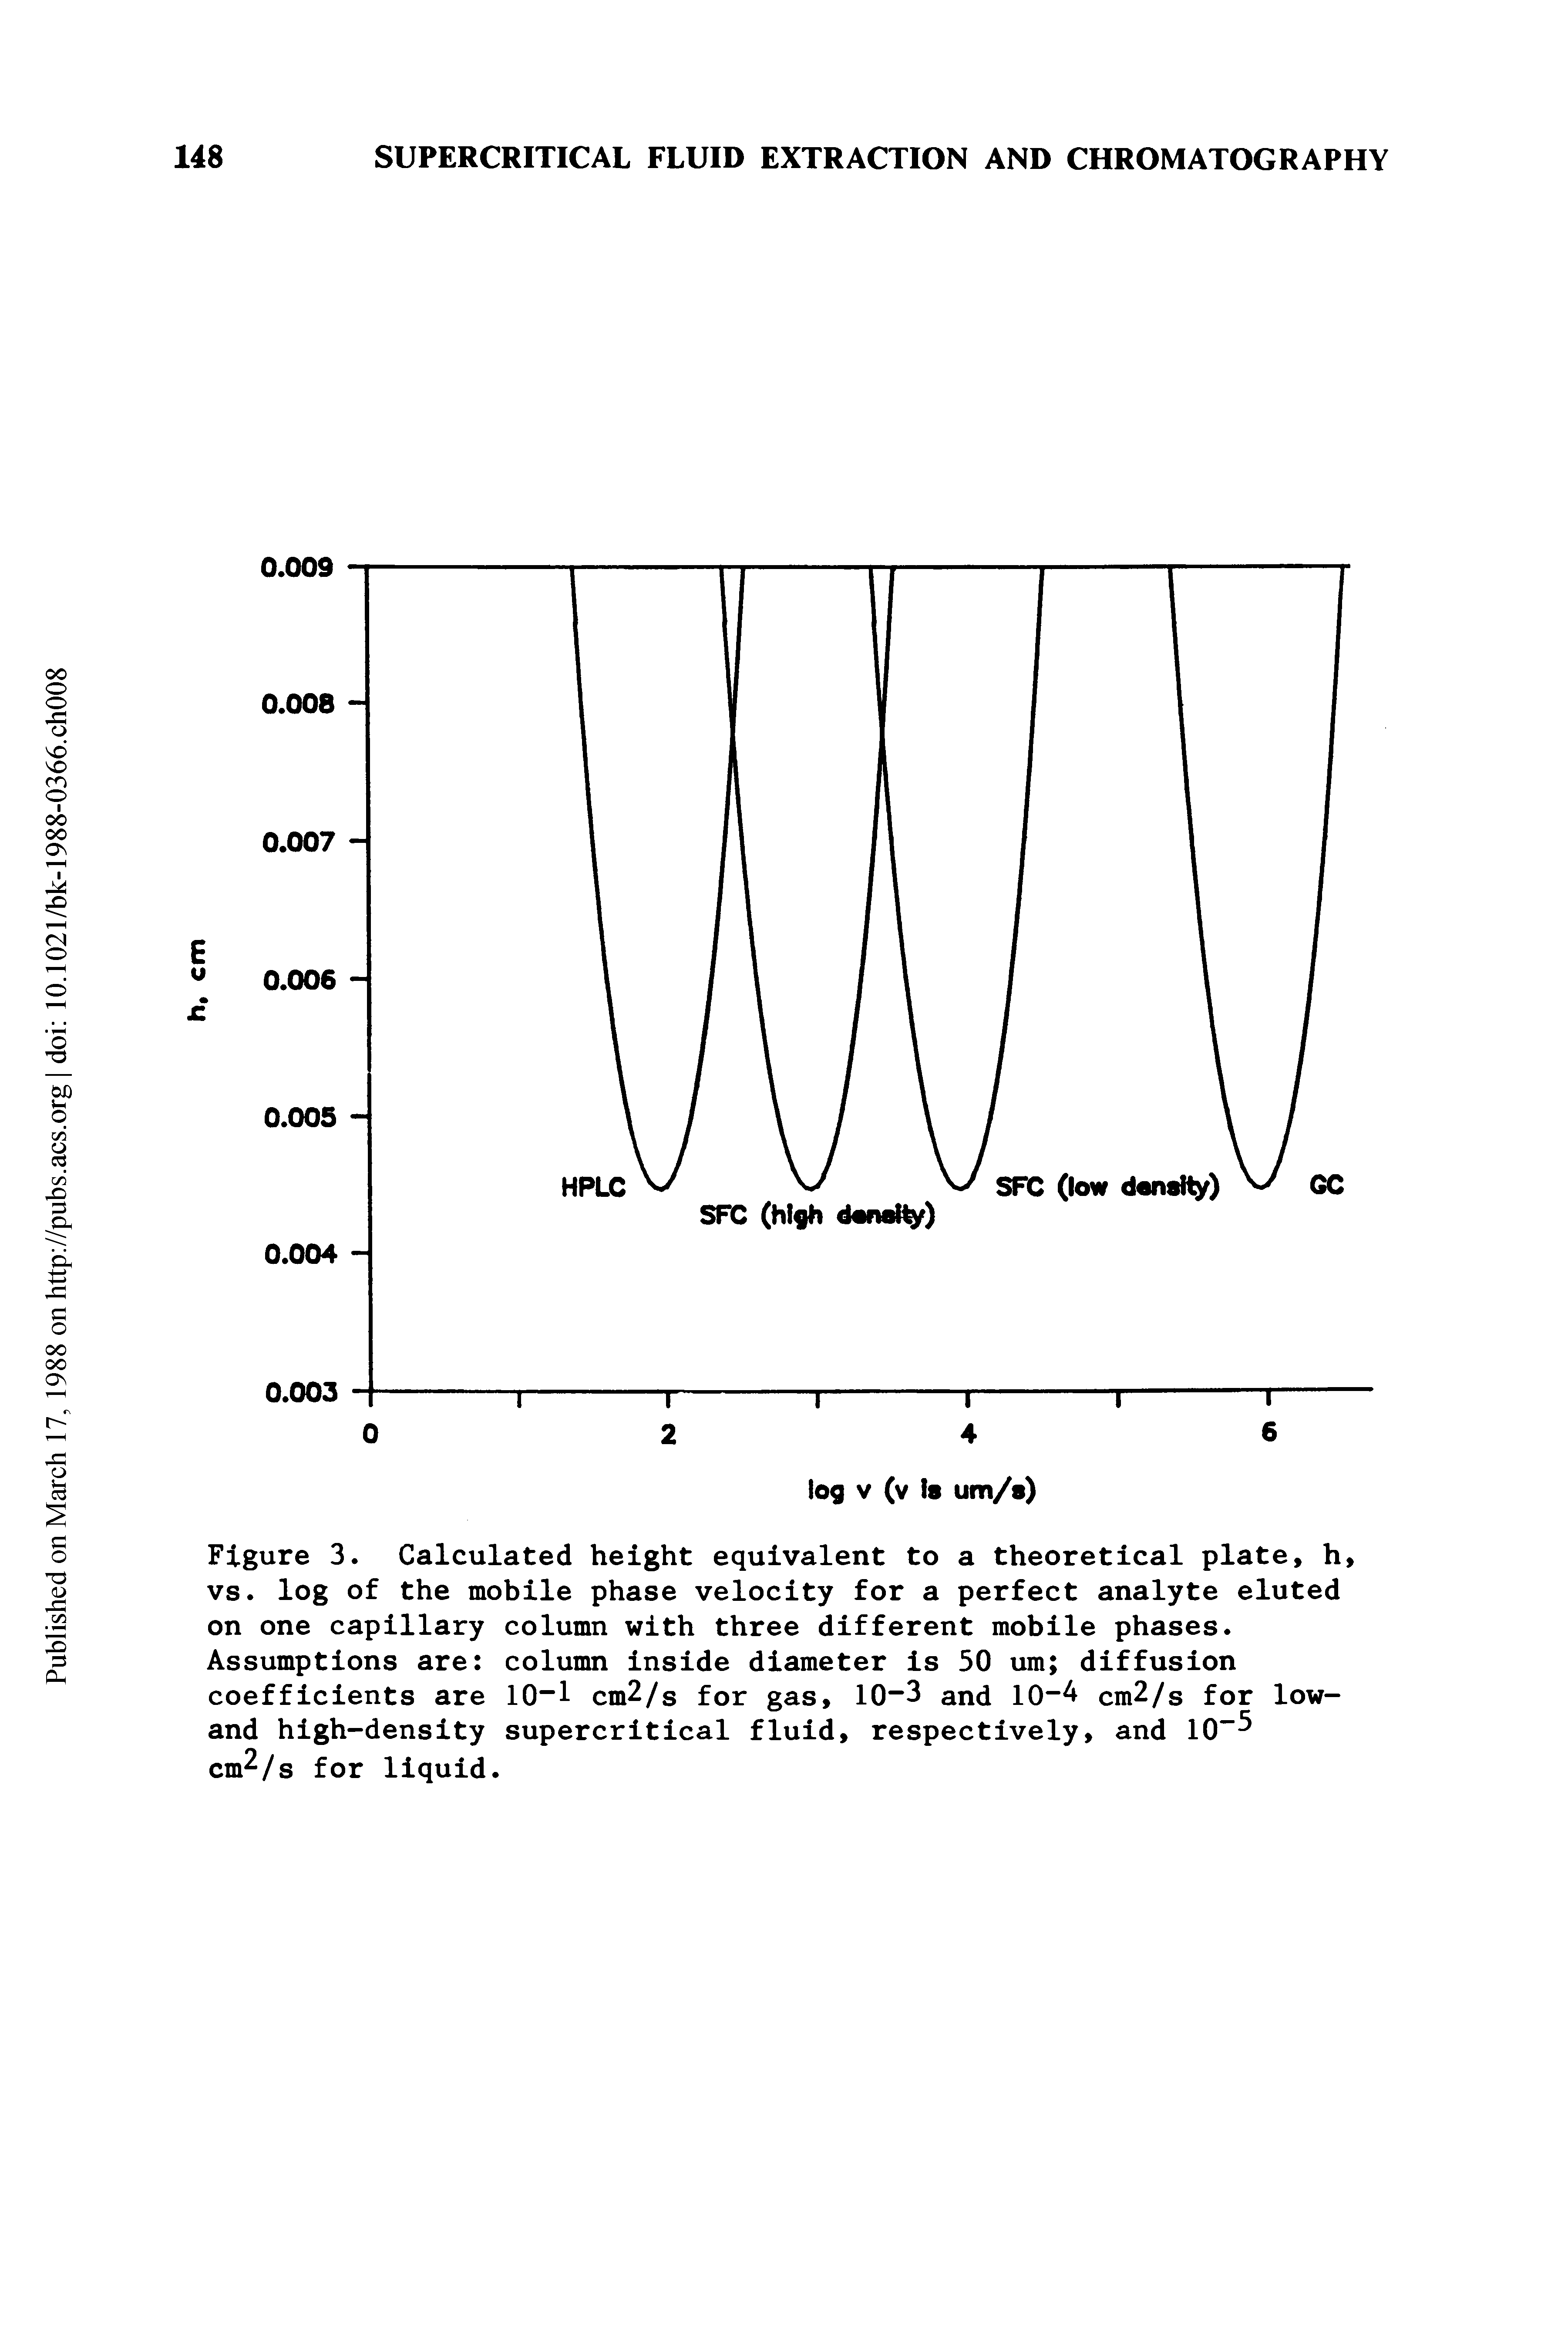 Figure 3. Calculated height equivalent to a theoretical plate, h, vs. log of the mobile phase velocity for a perfect analyte eluted on one capillary column with three different mobile phases. Assumptions are column inside diameter is 50 urn diffusion coefficients are 10 1 cm2/s for gas, 10-3 and 10-A cm2/s for low-and high-density supercritical fluid, respectively, and 10 cm /s for liquid.